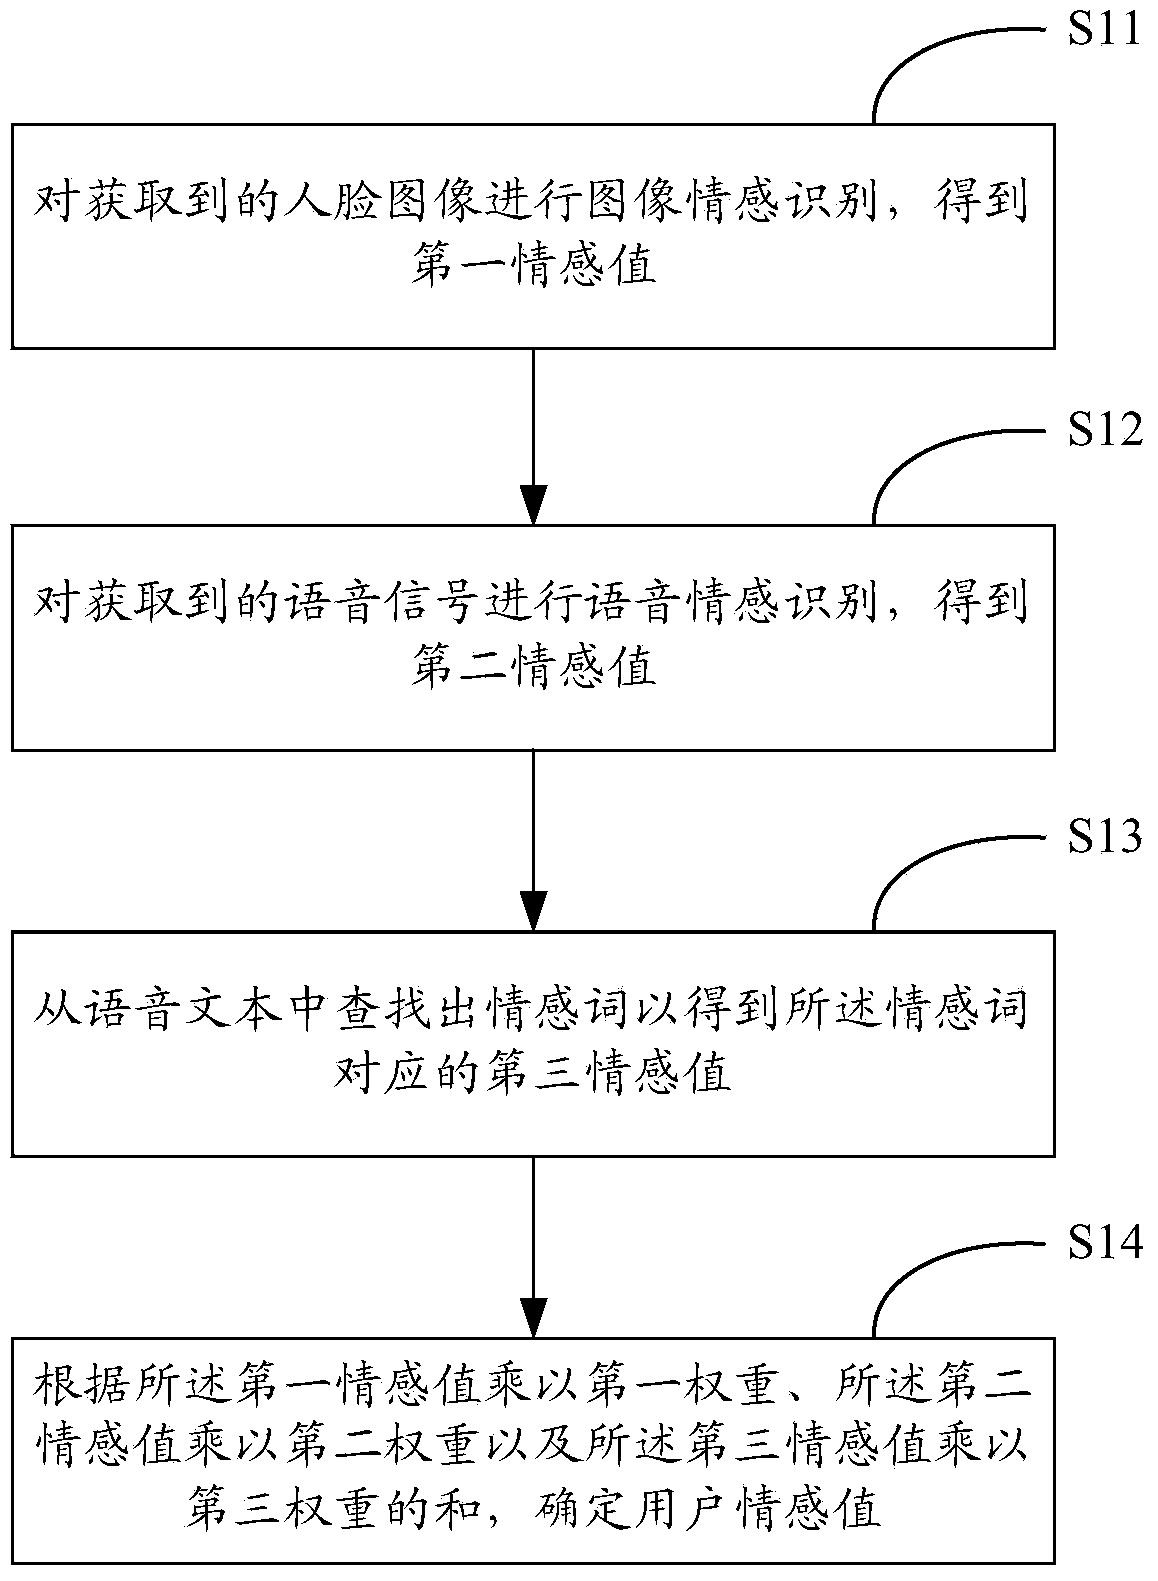 Emotion recognition method and device